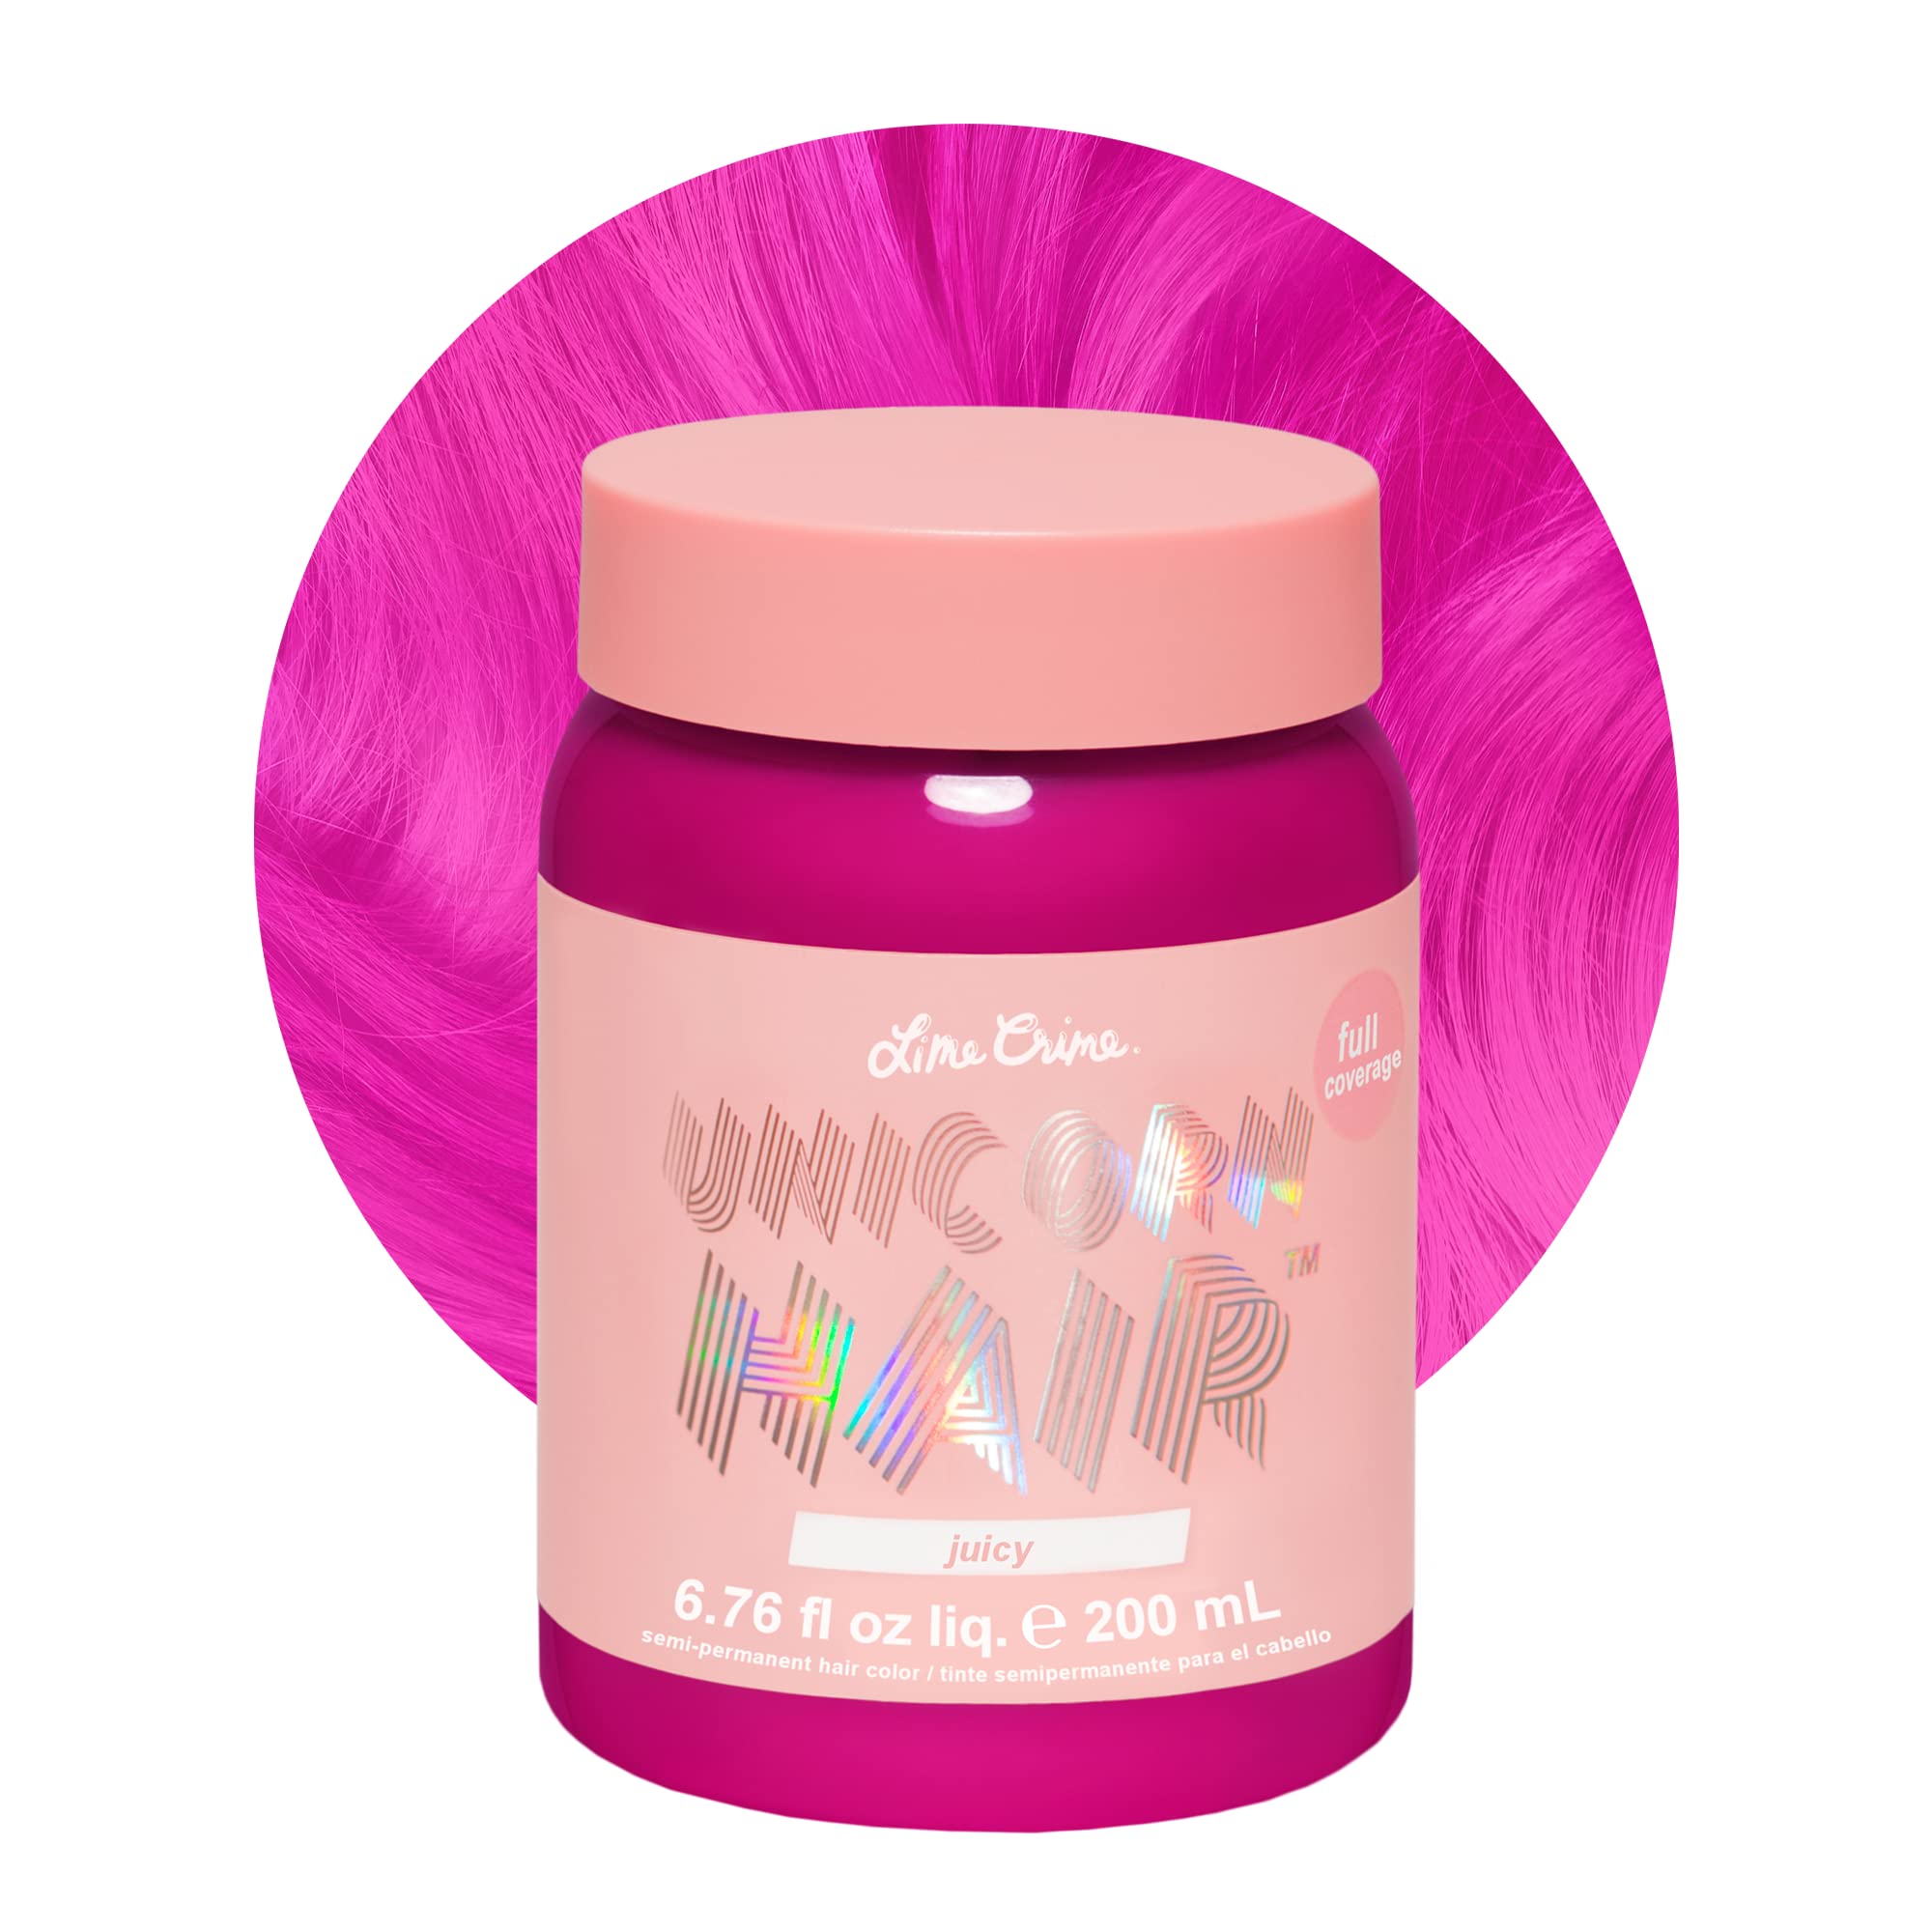 Lime Crime Unicorn Hair Dye, Anime - Candy Blue Fantasy Hair Color - Full  Coverage, Ultra-Conditioning, Semi-Permanent, Damage-Free Formula - Vegan -  6.76 fl oz: Watch 2 Reviews on Supergreat